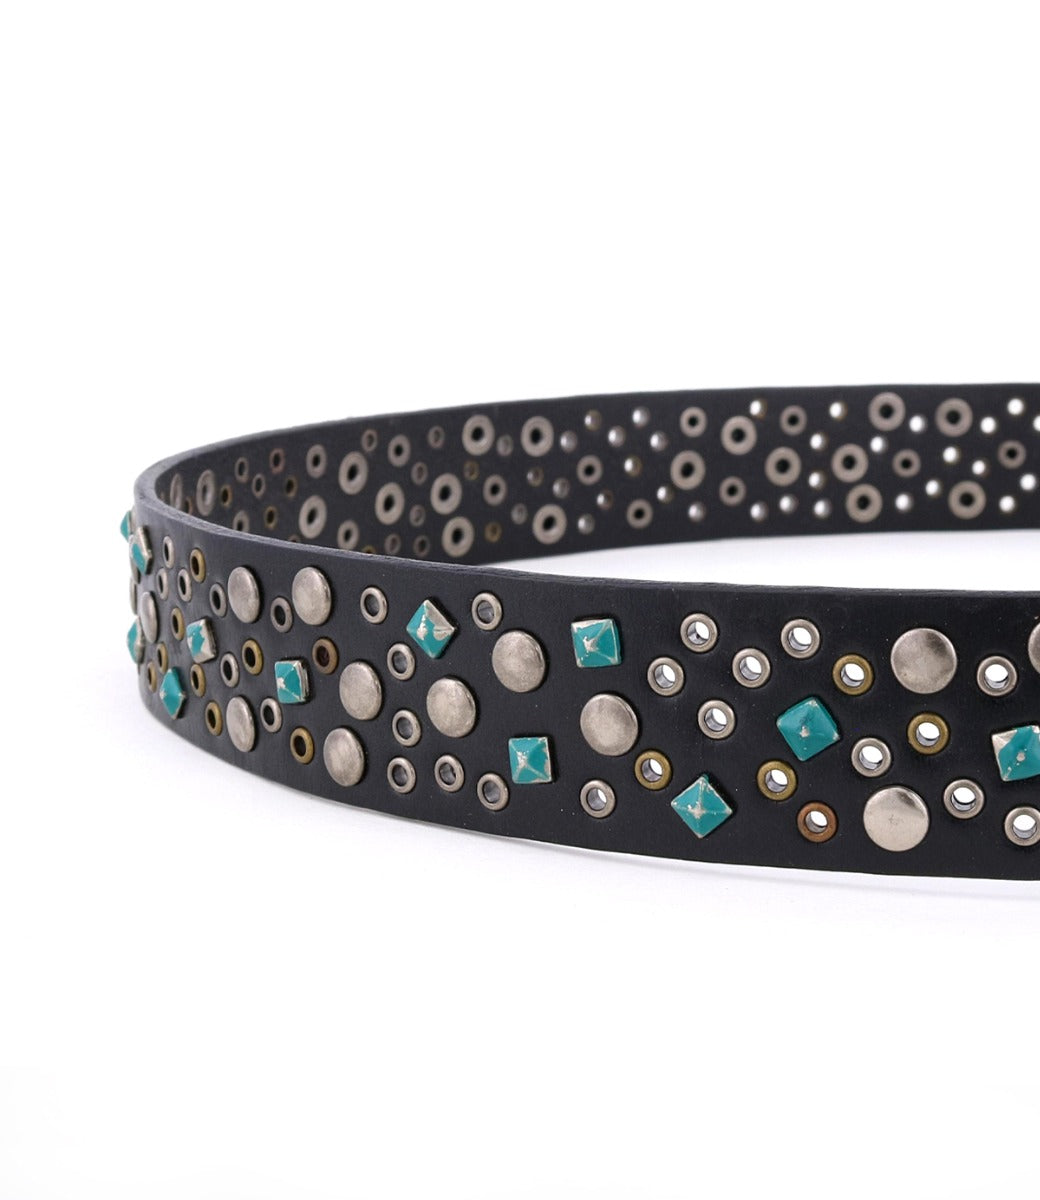 A Tammin belt with turquoise studded stones from Bed Stu.